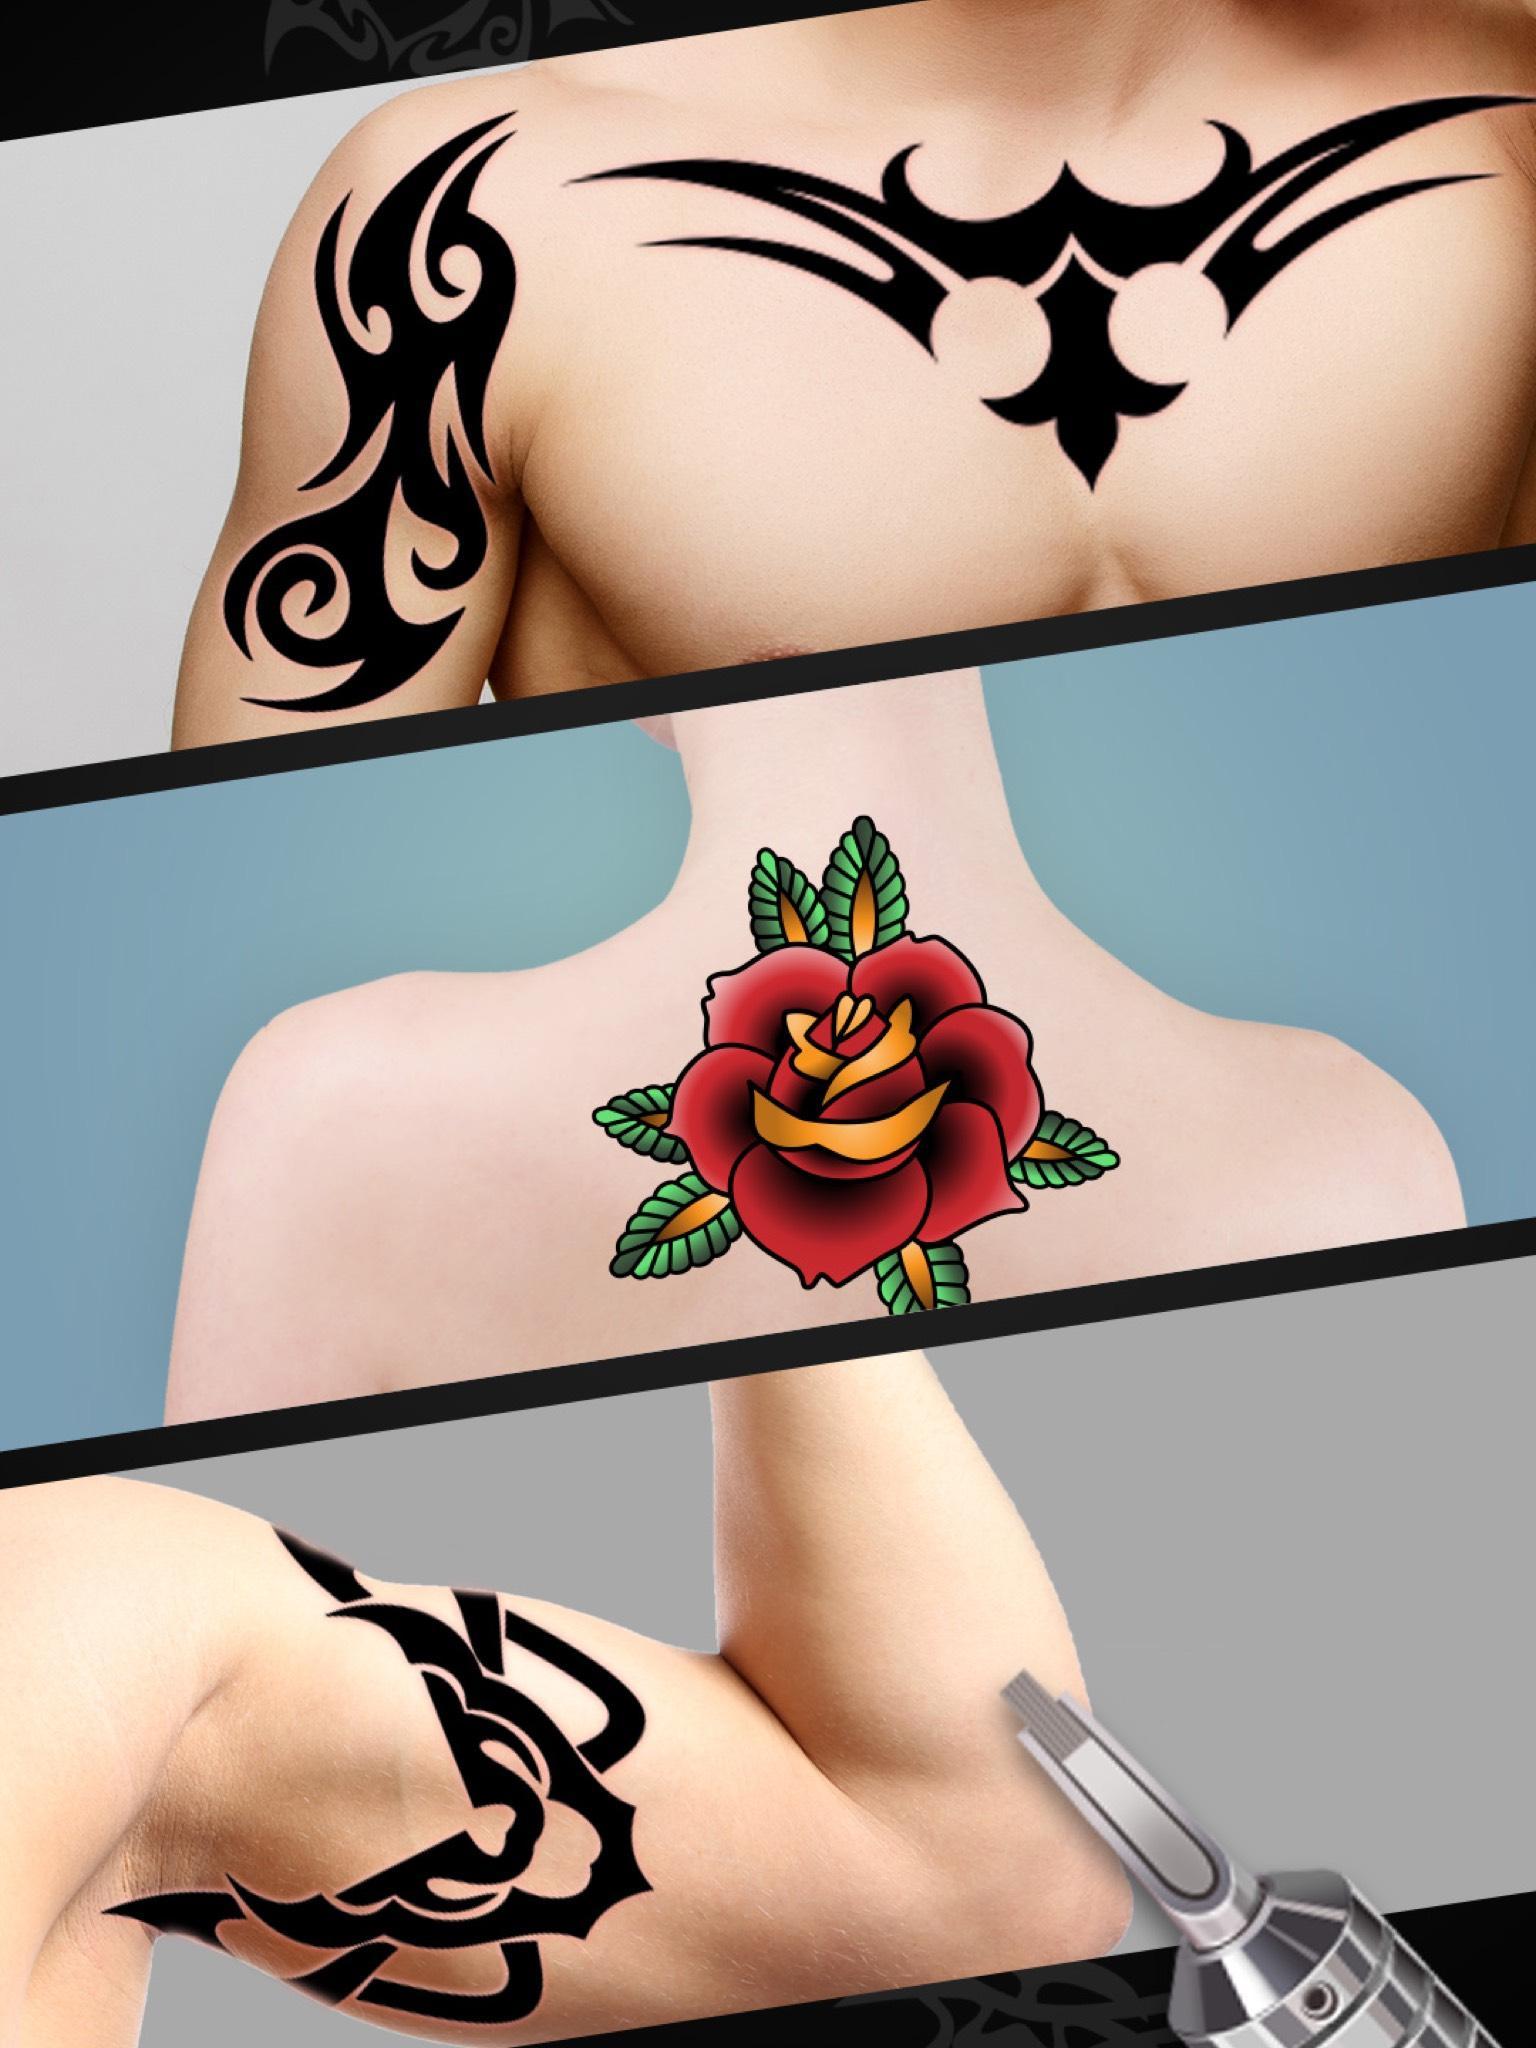 Tattoo Maker for Android - APK Download